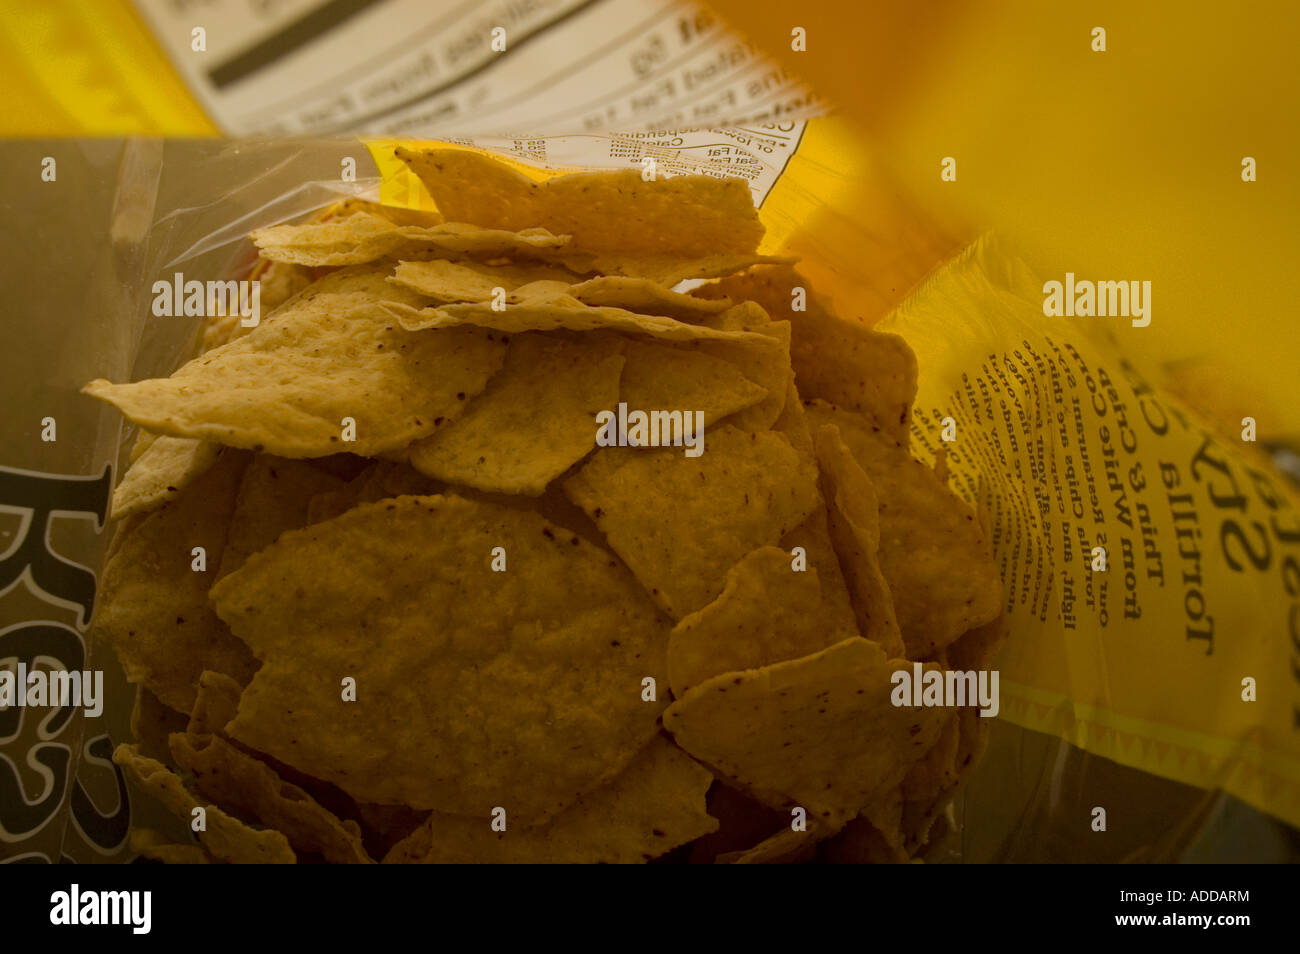 A bag of salt free tortilla chips made with stone ground white corn Stock Photo